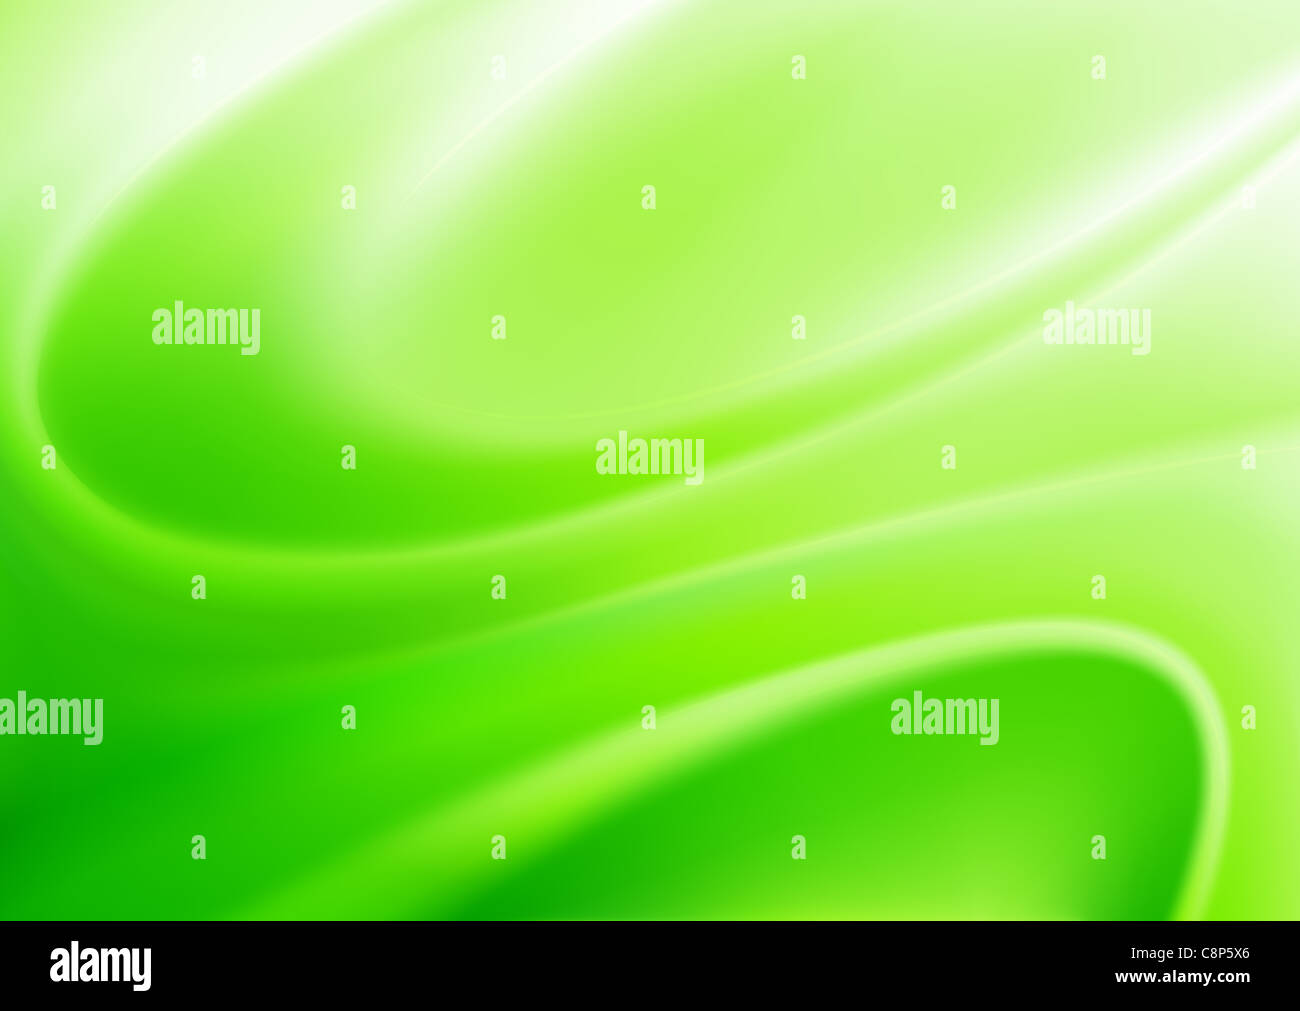 illustration of green abstract background made of light splashes and curved lines Stock Photo